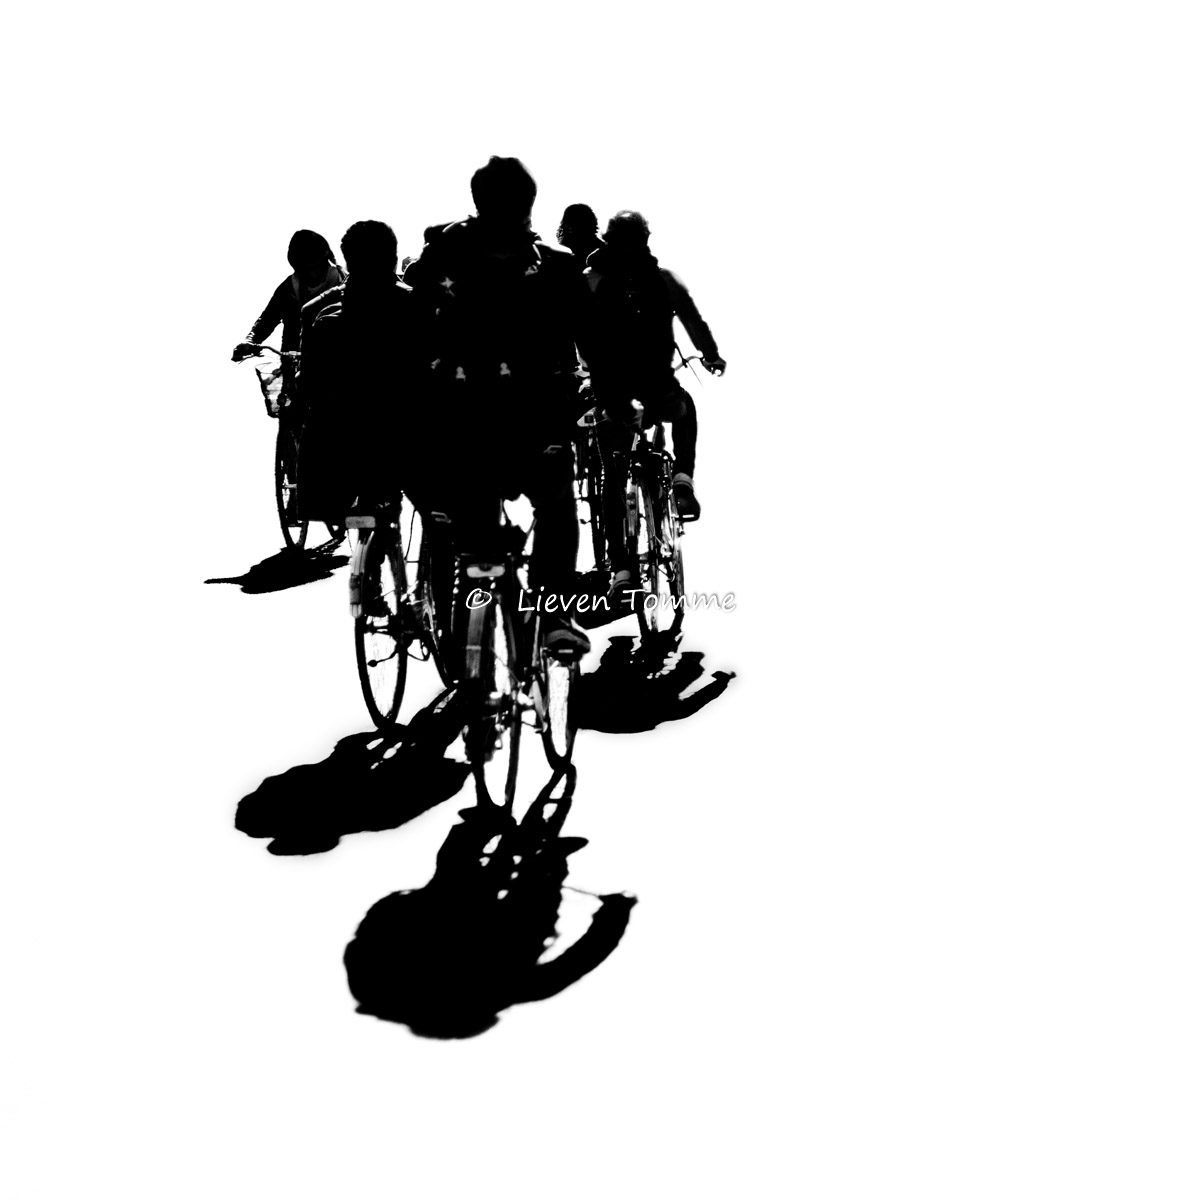 Cyclists silhouettes